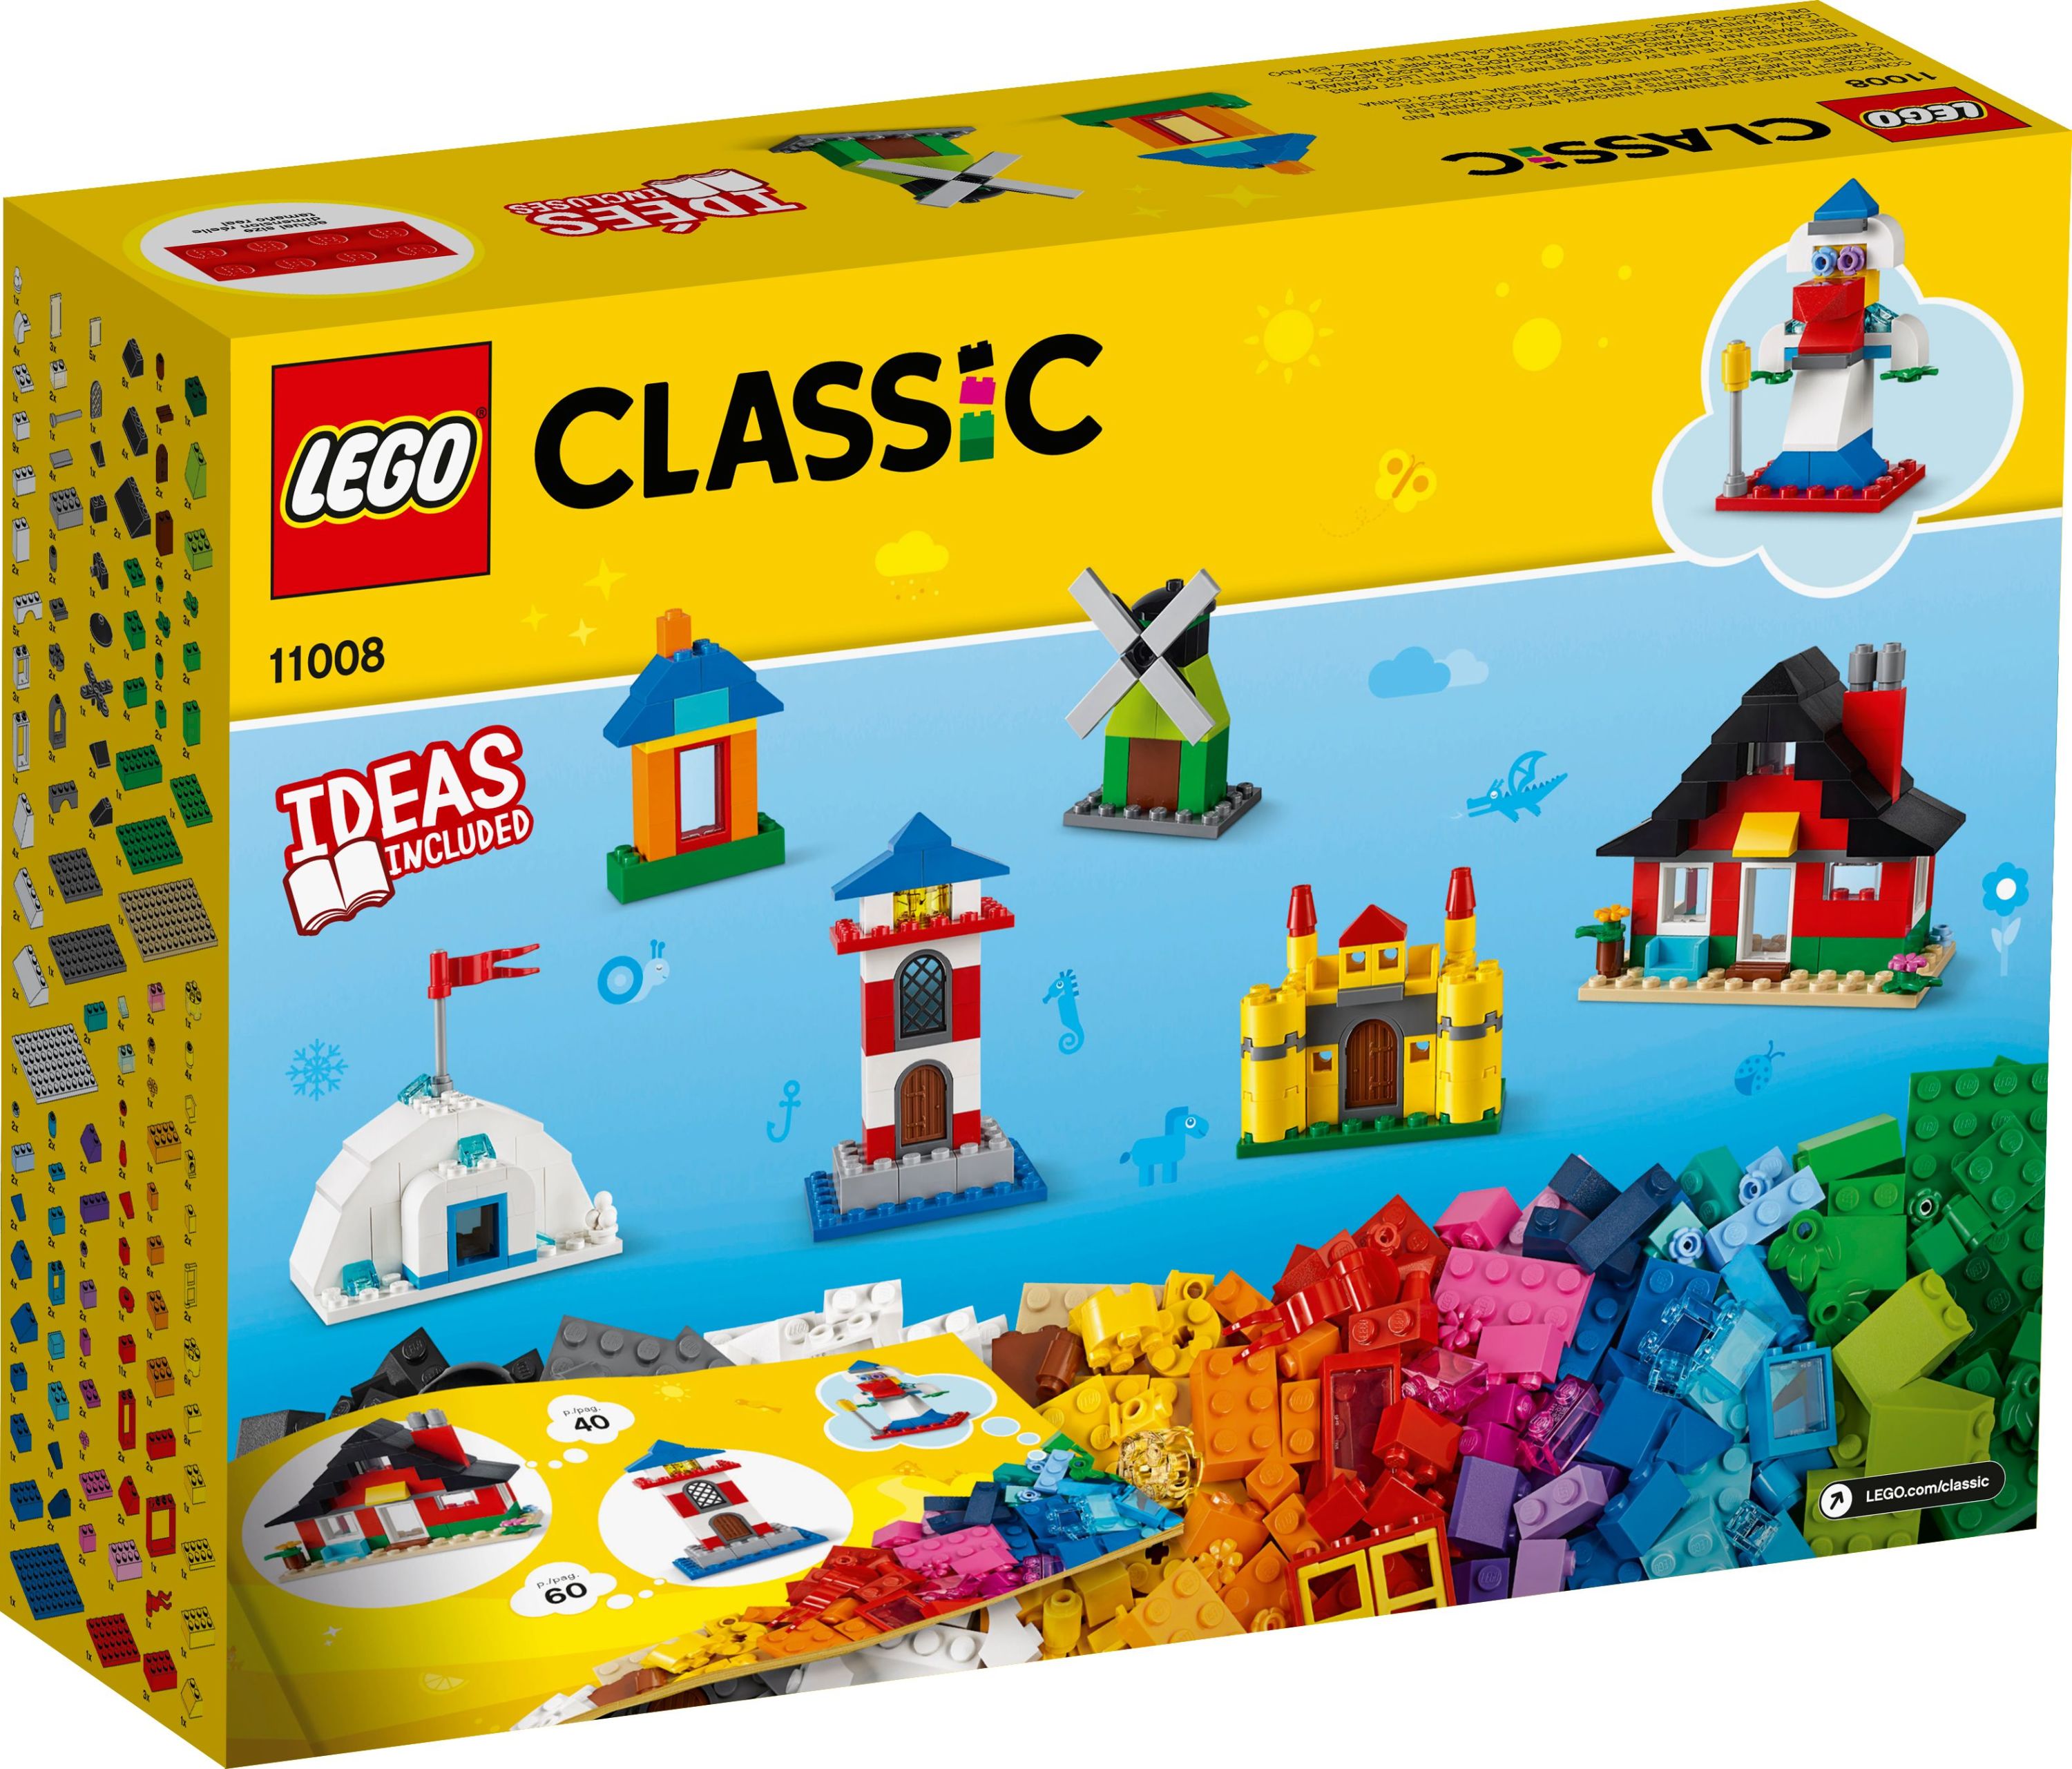 LEGO Classic Bricks and Houses 11008 Building Set for Imaginative Play (270 Pieces) - image 5 of 7